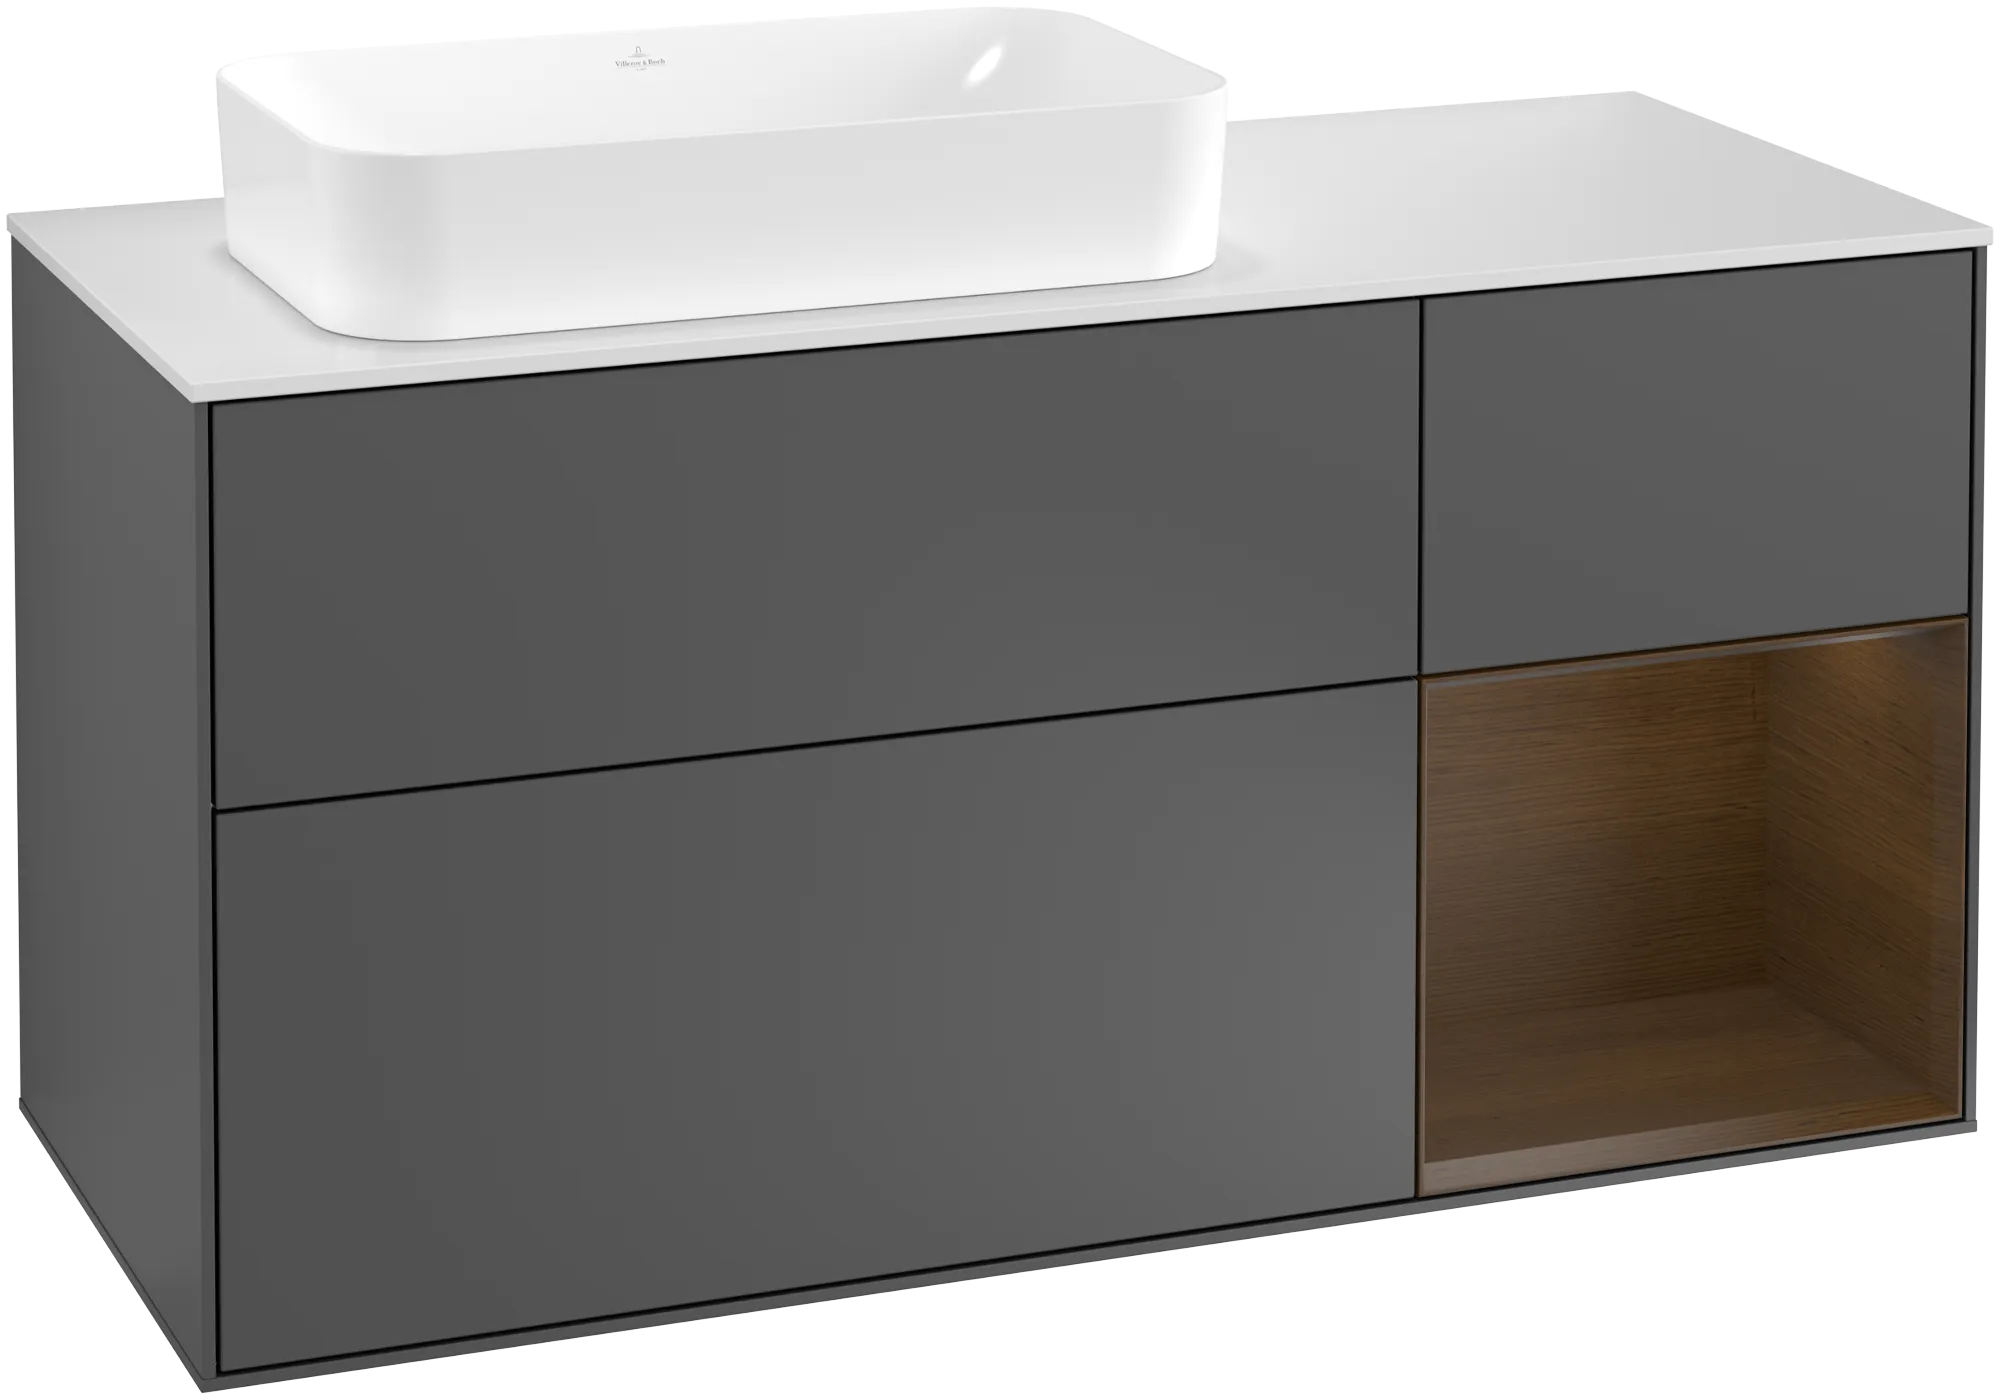 Picture of VILLEROY BOCH Finion Vanity unit, with lighting, 3 pull-out compartments, 1200 x 603 x 501 mm, Anthracite Matt Lacquer / Walnut Veneer / Glass White Matt #G281GNGK